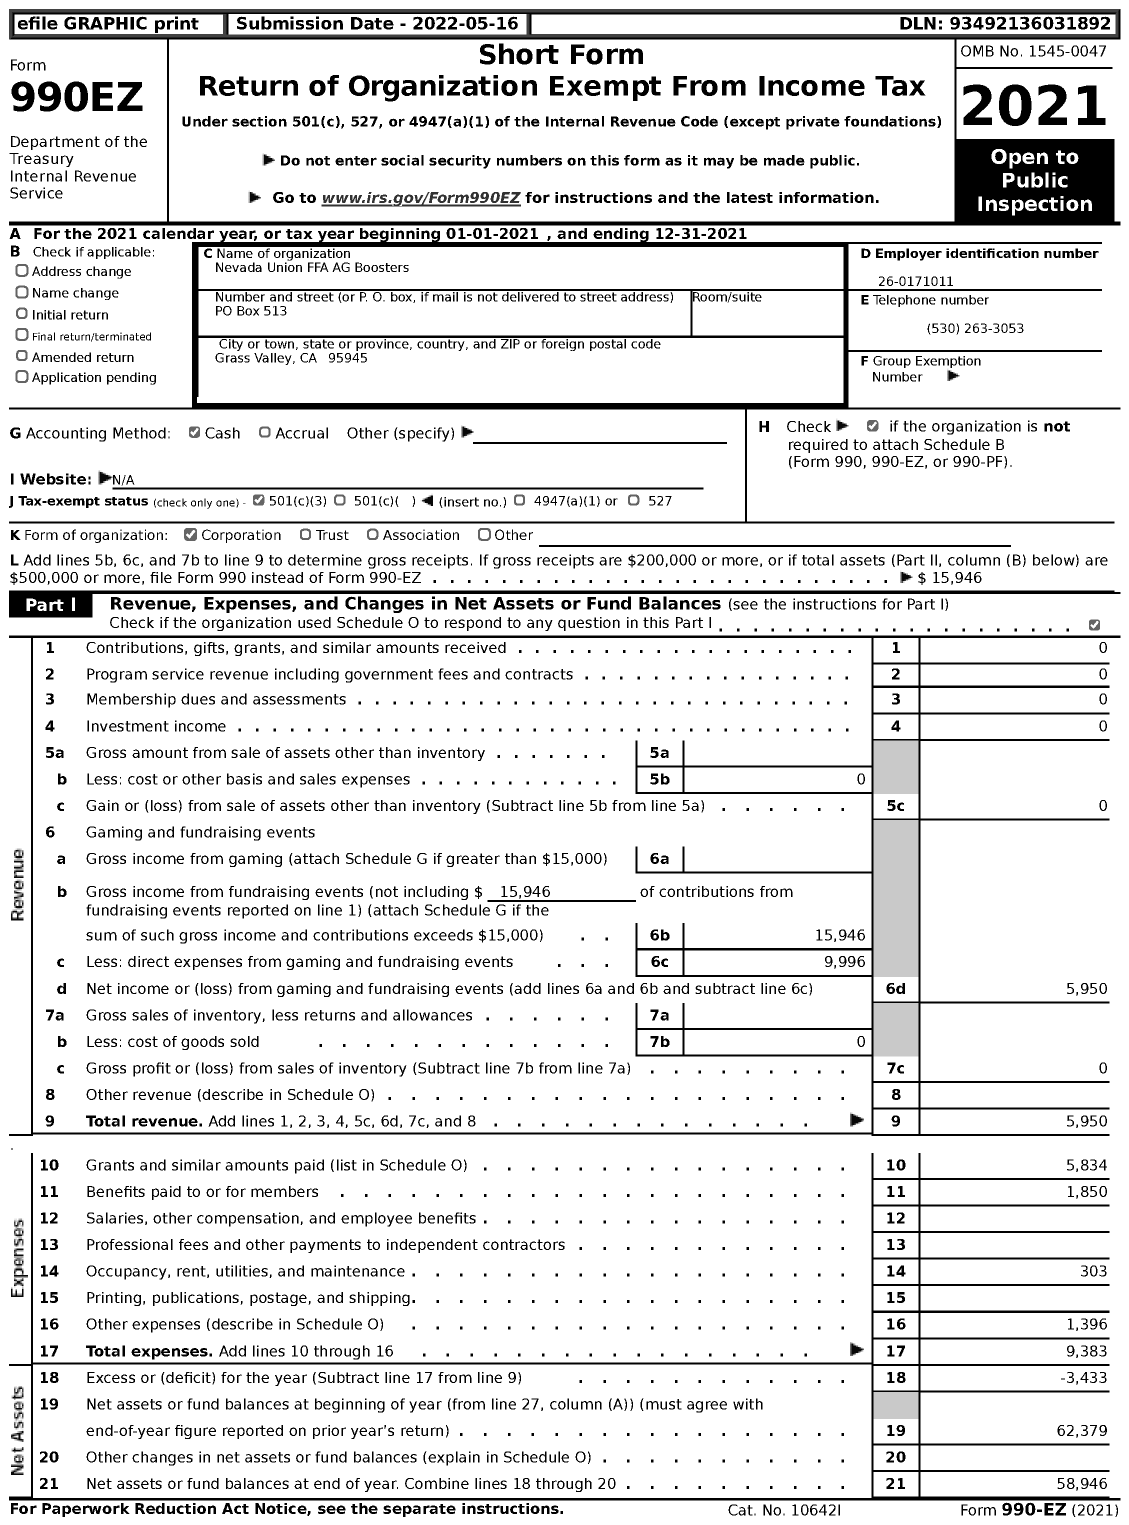 Image of first page of 2021 Form 990EZ for Nevada Union FFA AG Boosters